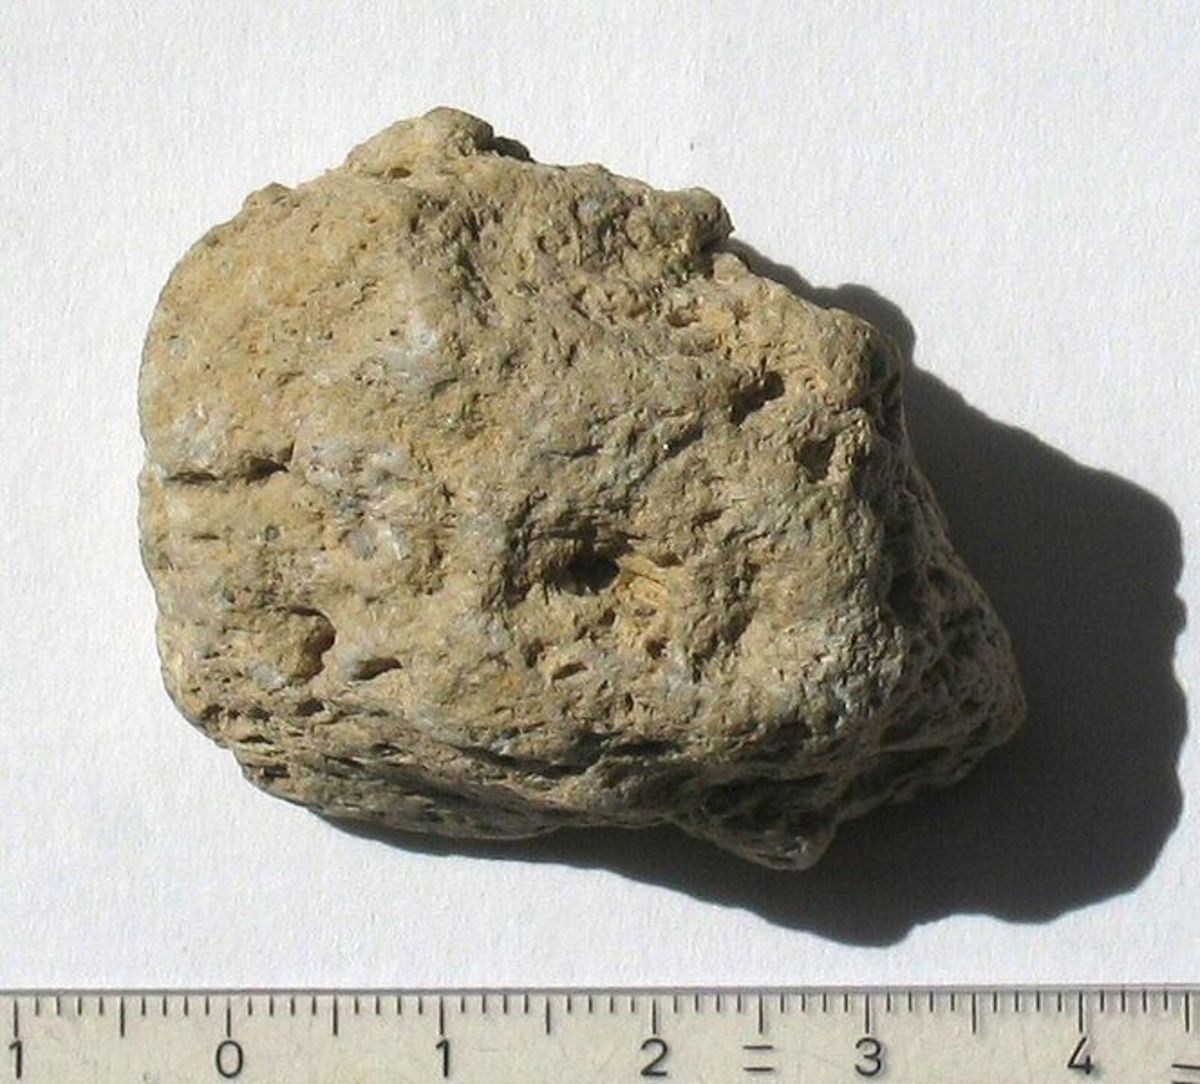 A sample of natural pumice stone from Greece.